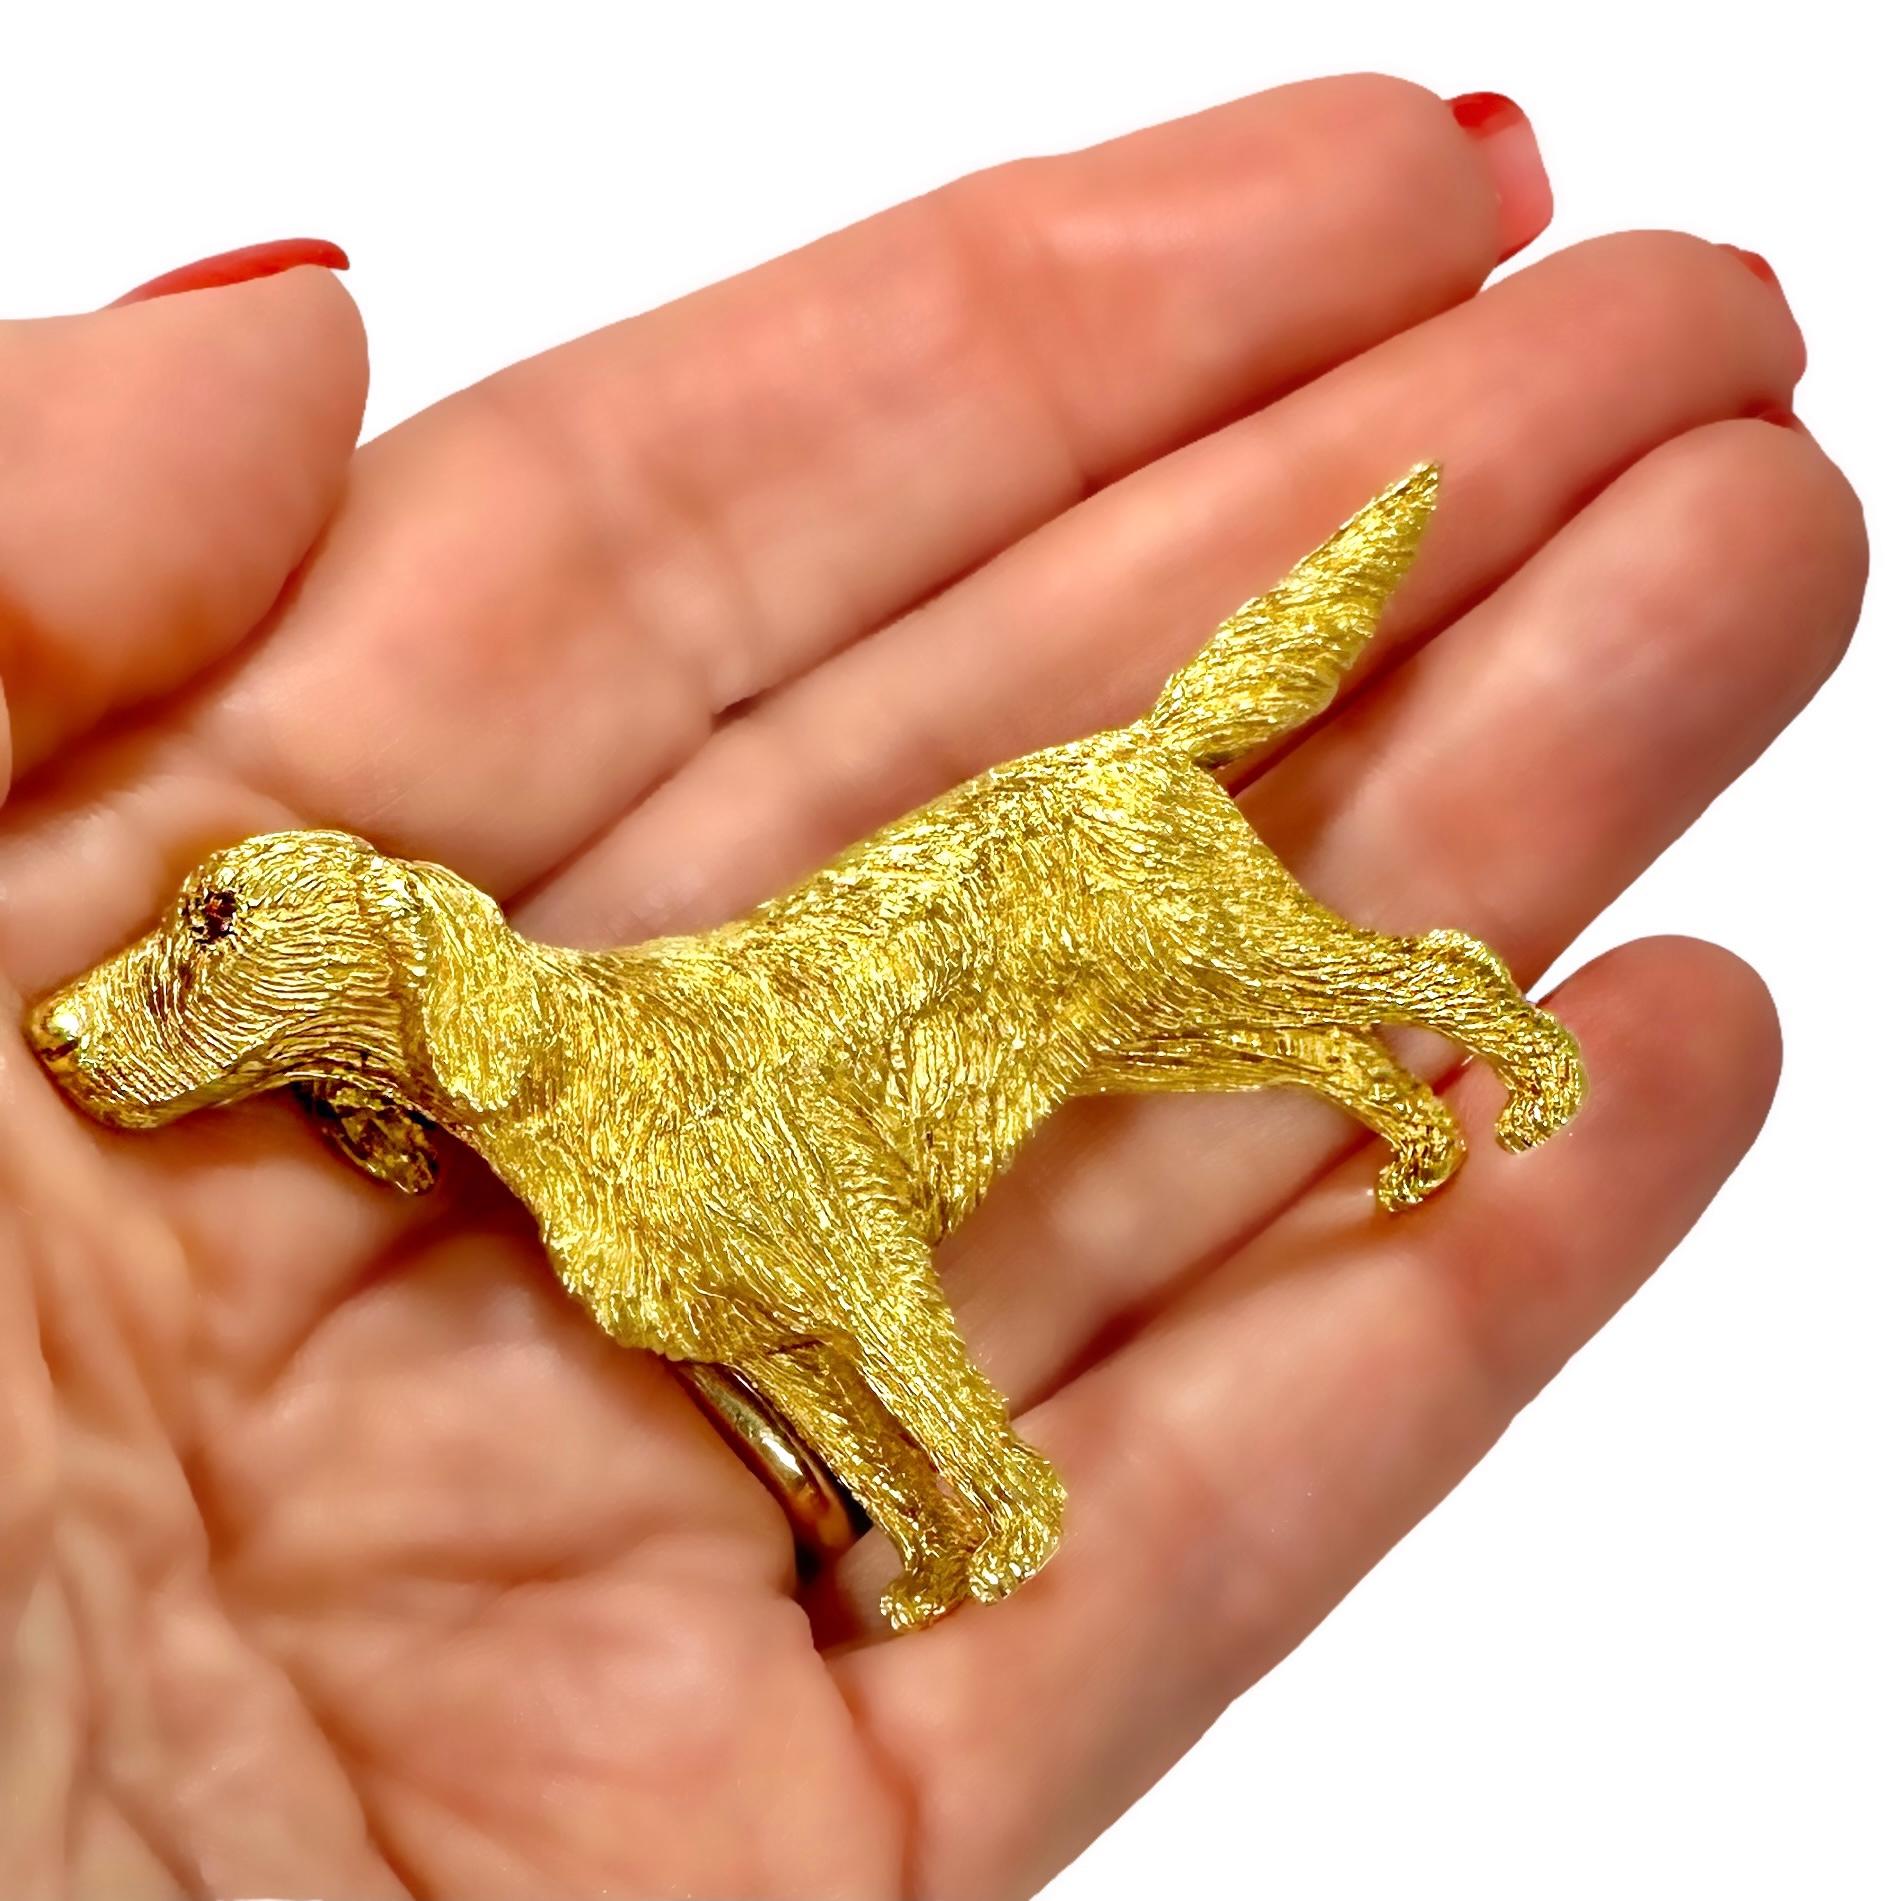 Incredibly Lifelike Vintage 18k Yellow Gold Setter Dog Brooch with Ruby Eyes For Sale 2